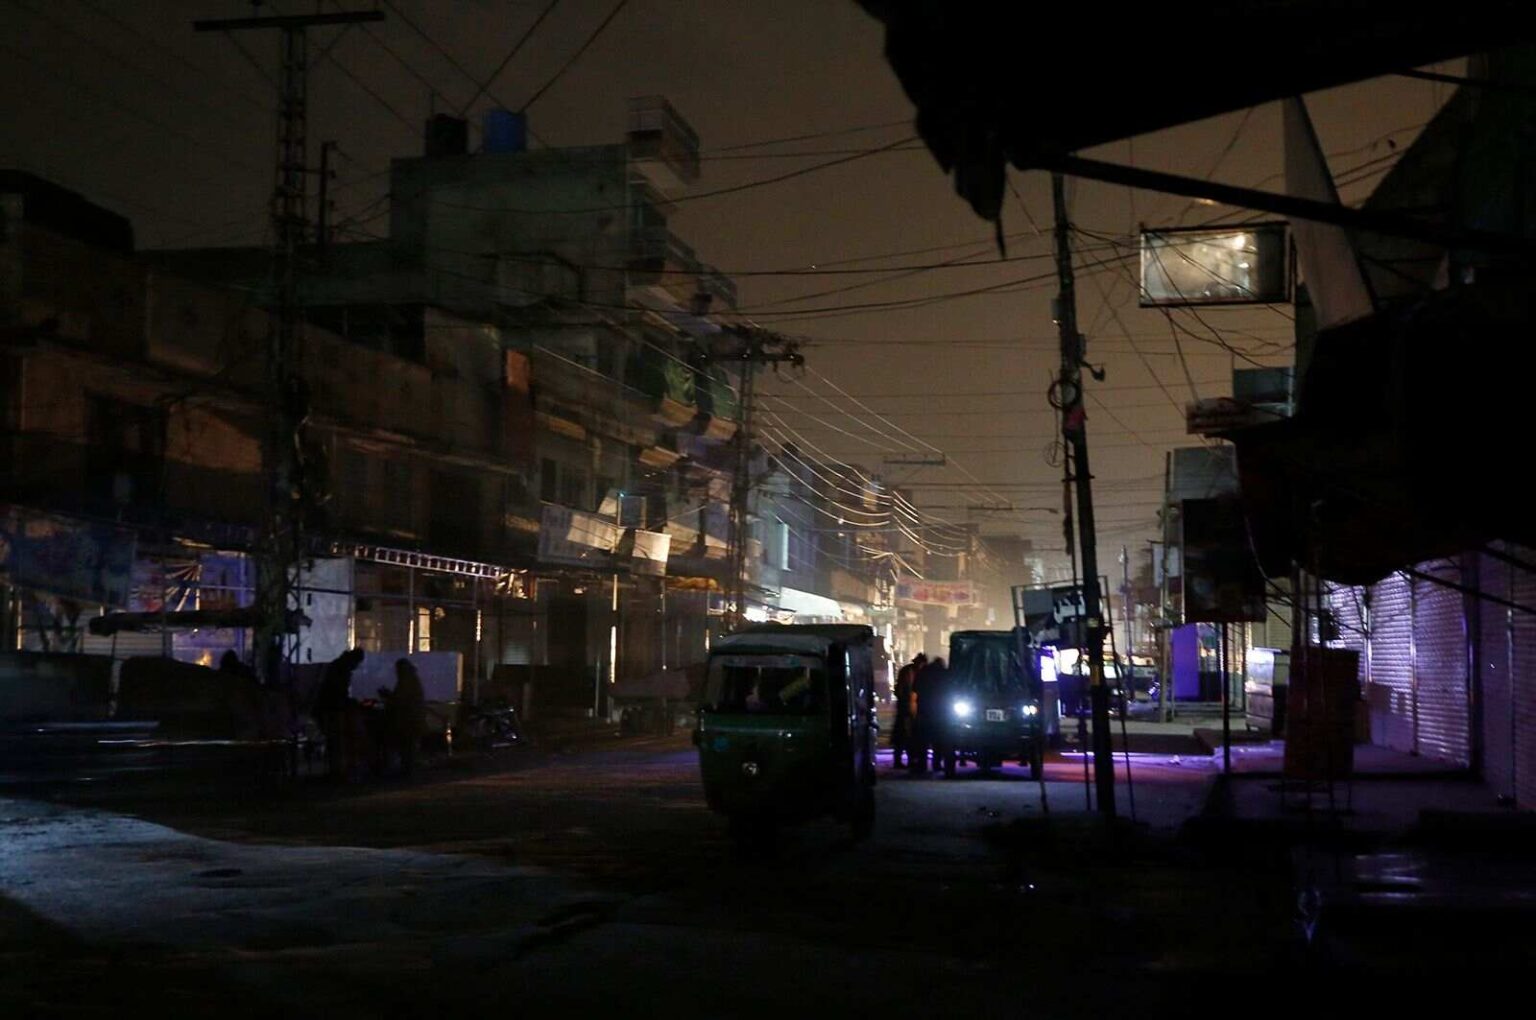 Pakistan power outage: Mass outage cuts power to most of Pakistan 